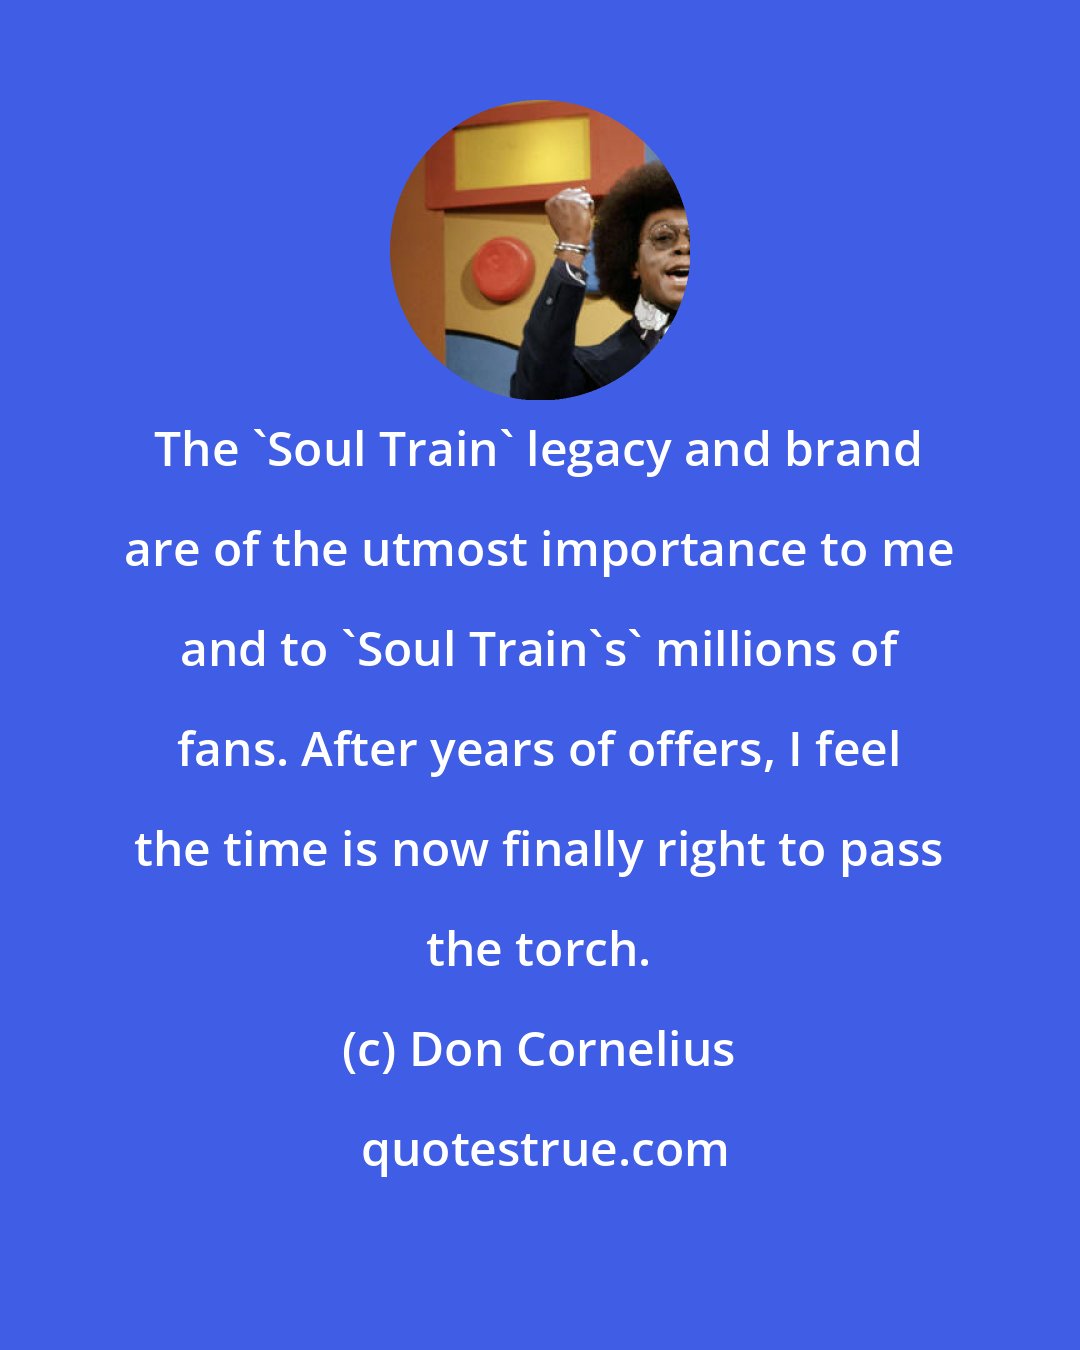 Don Cornelius: The 'Soul Train' legacy and brand are of the utmost importance to me and to 'Soul Train's' millions of fans. After years of offers, I feel the time is now finally right to pass the torch.